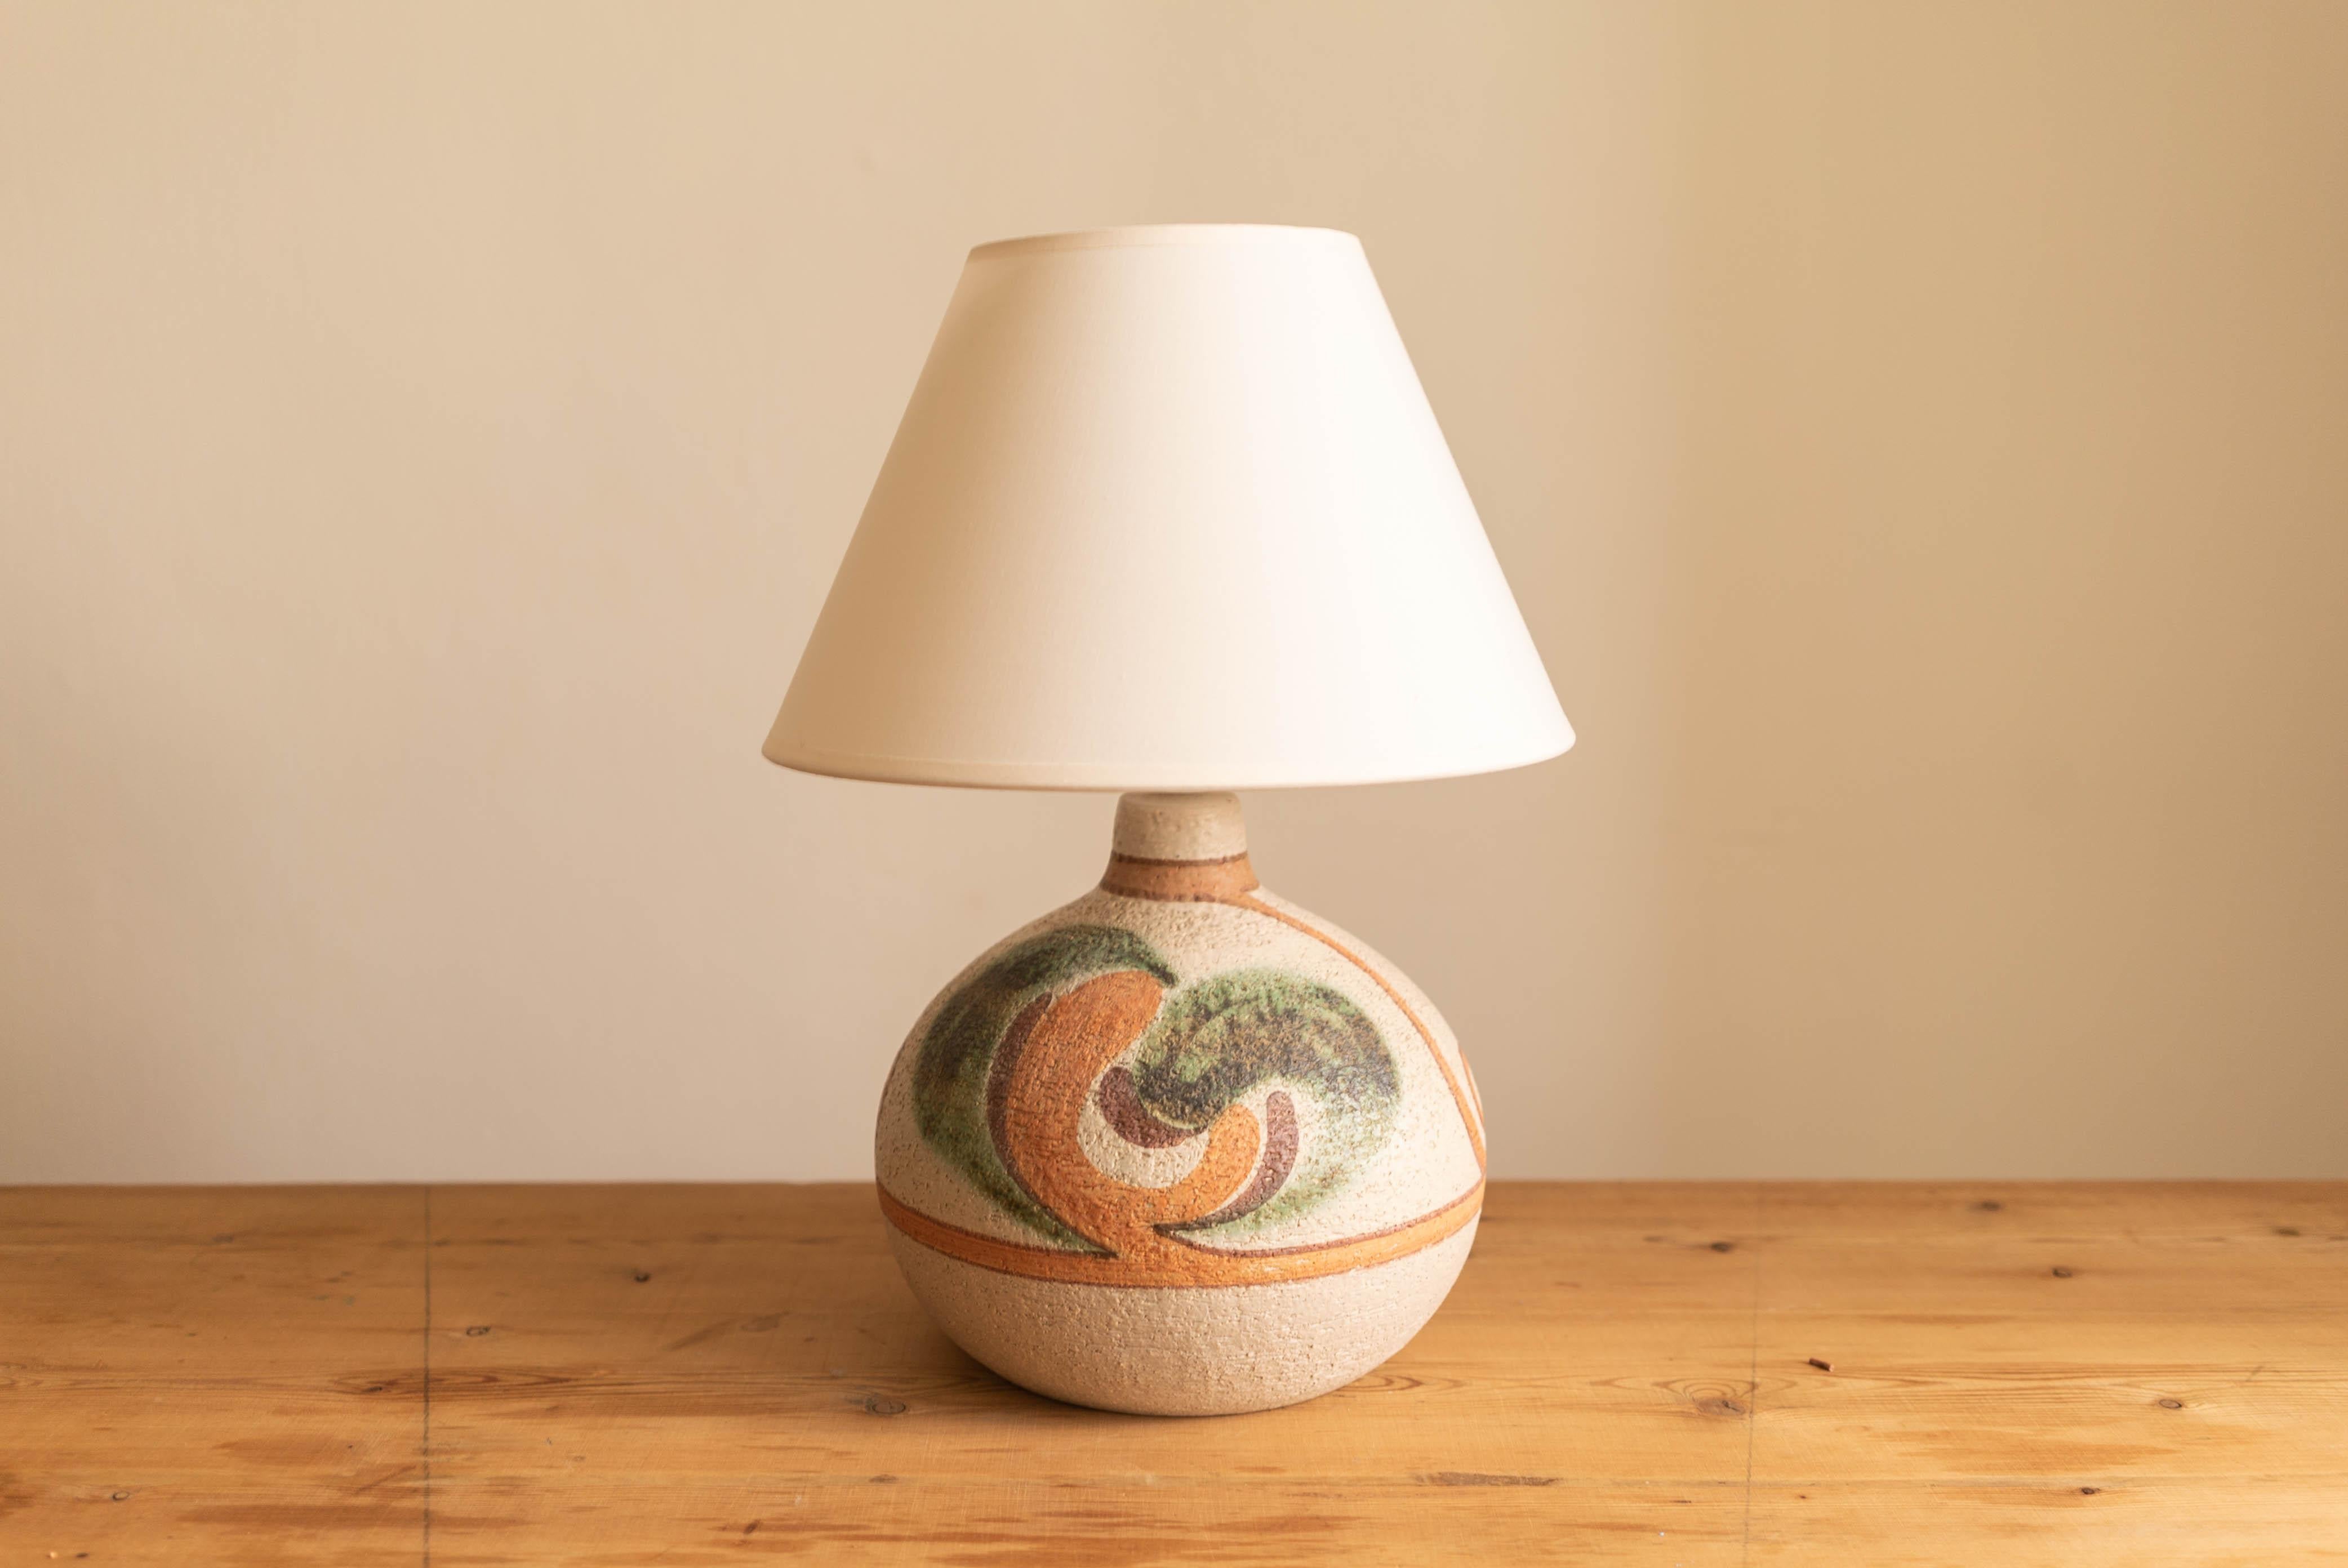 Small table lamp by NOOMI BACKHAUSEN for Søholm Stentøj, Denmark, 1960s.

Stamped and signed on the base.

Sold without lampshade. Height includes socket. Fully functional and in beautiful condition.